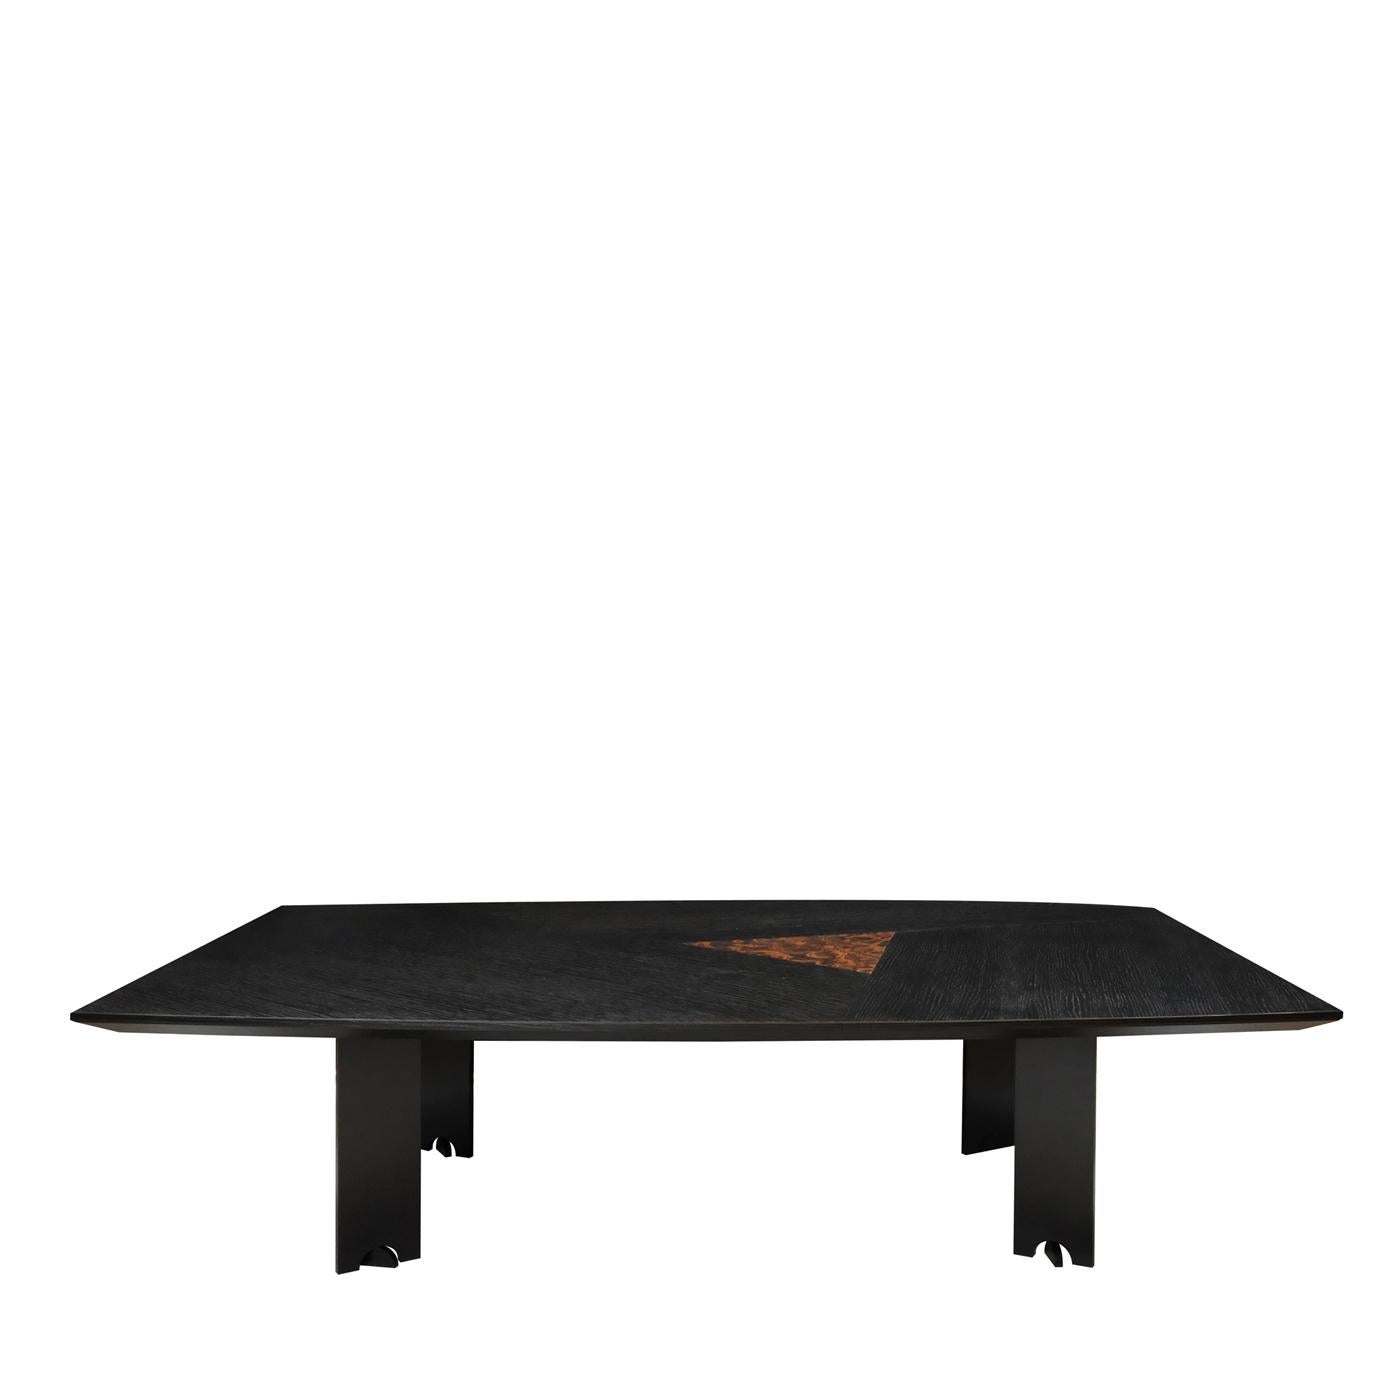 A timeless and unconventional piece of functional decor, this striking table is exquisitely crafted of black-stained oak wood and boasts a triangular ebony inlay on top. Made of metal with a matte black powder coating, the adjustable legs are